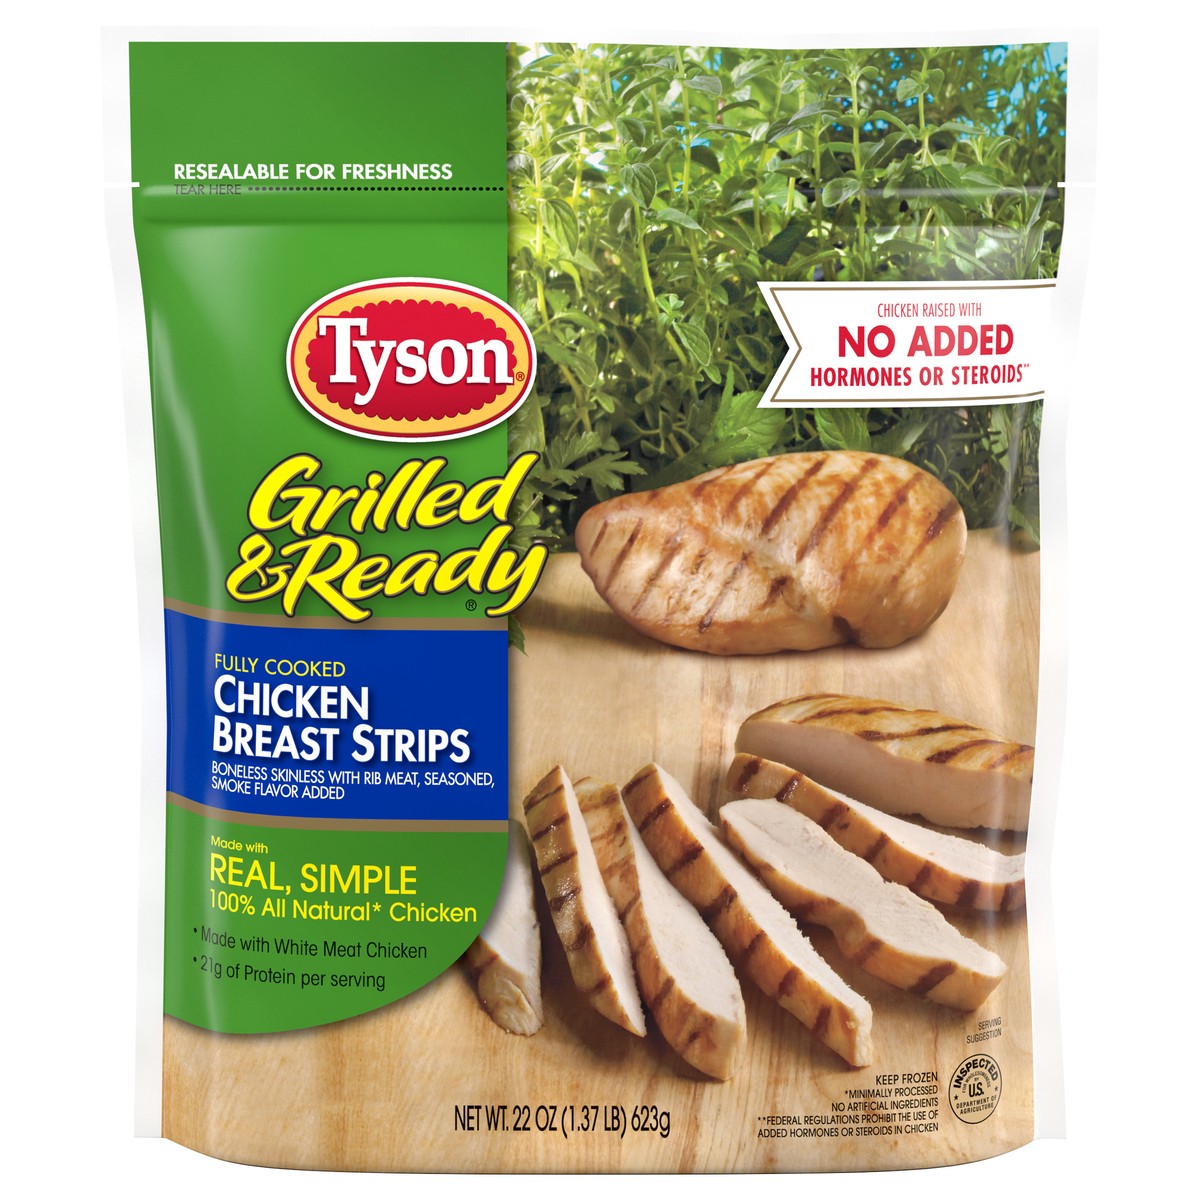 slide 1 of 10, TYSON GRILLED AND READY Tyson Grilled & Ready Fully Cooked Grilled Chicken Breast Strips, 22 oz. (Frozen), 623.69 g